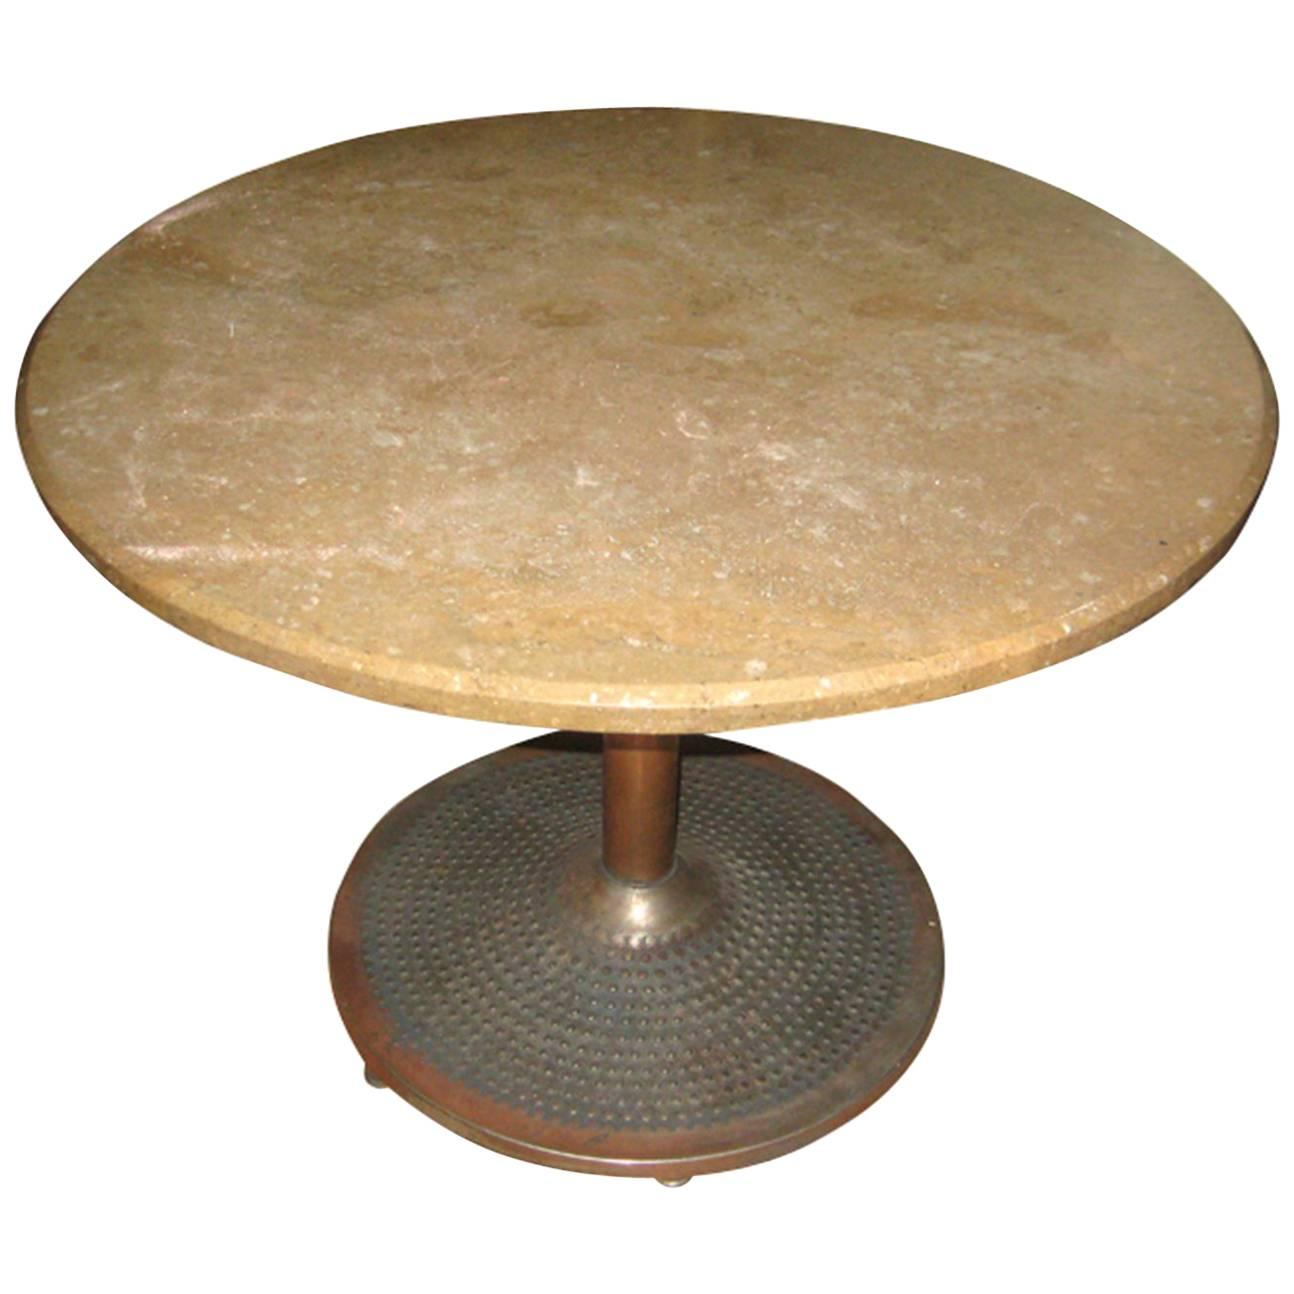 Mid-20th Century Coppered Steel and Travertine Table For Sale